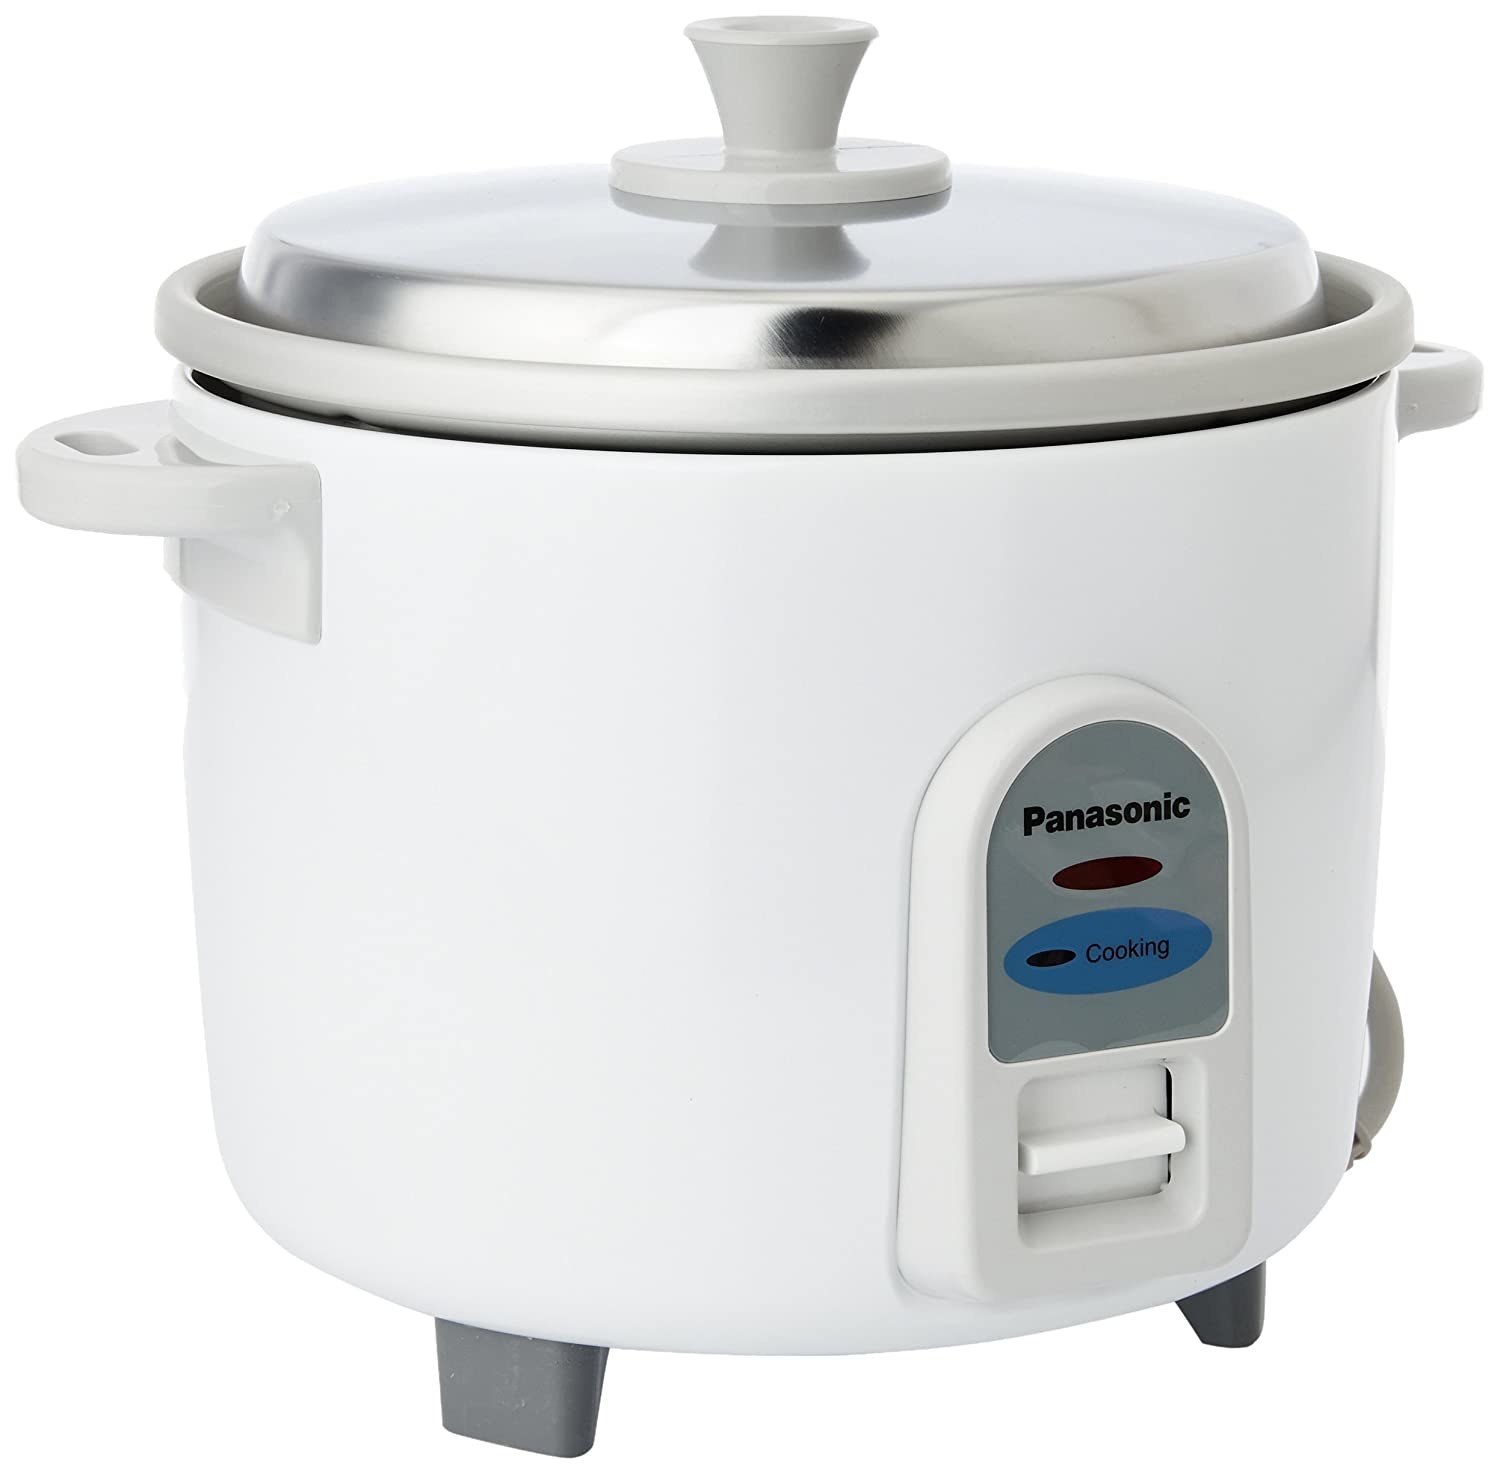 A rice cooker